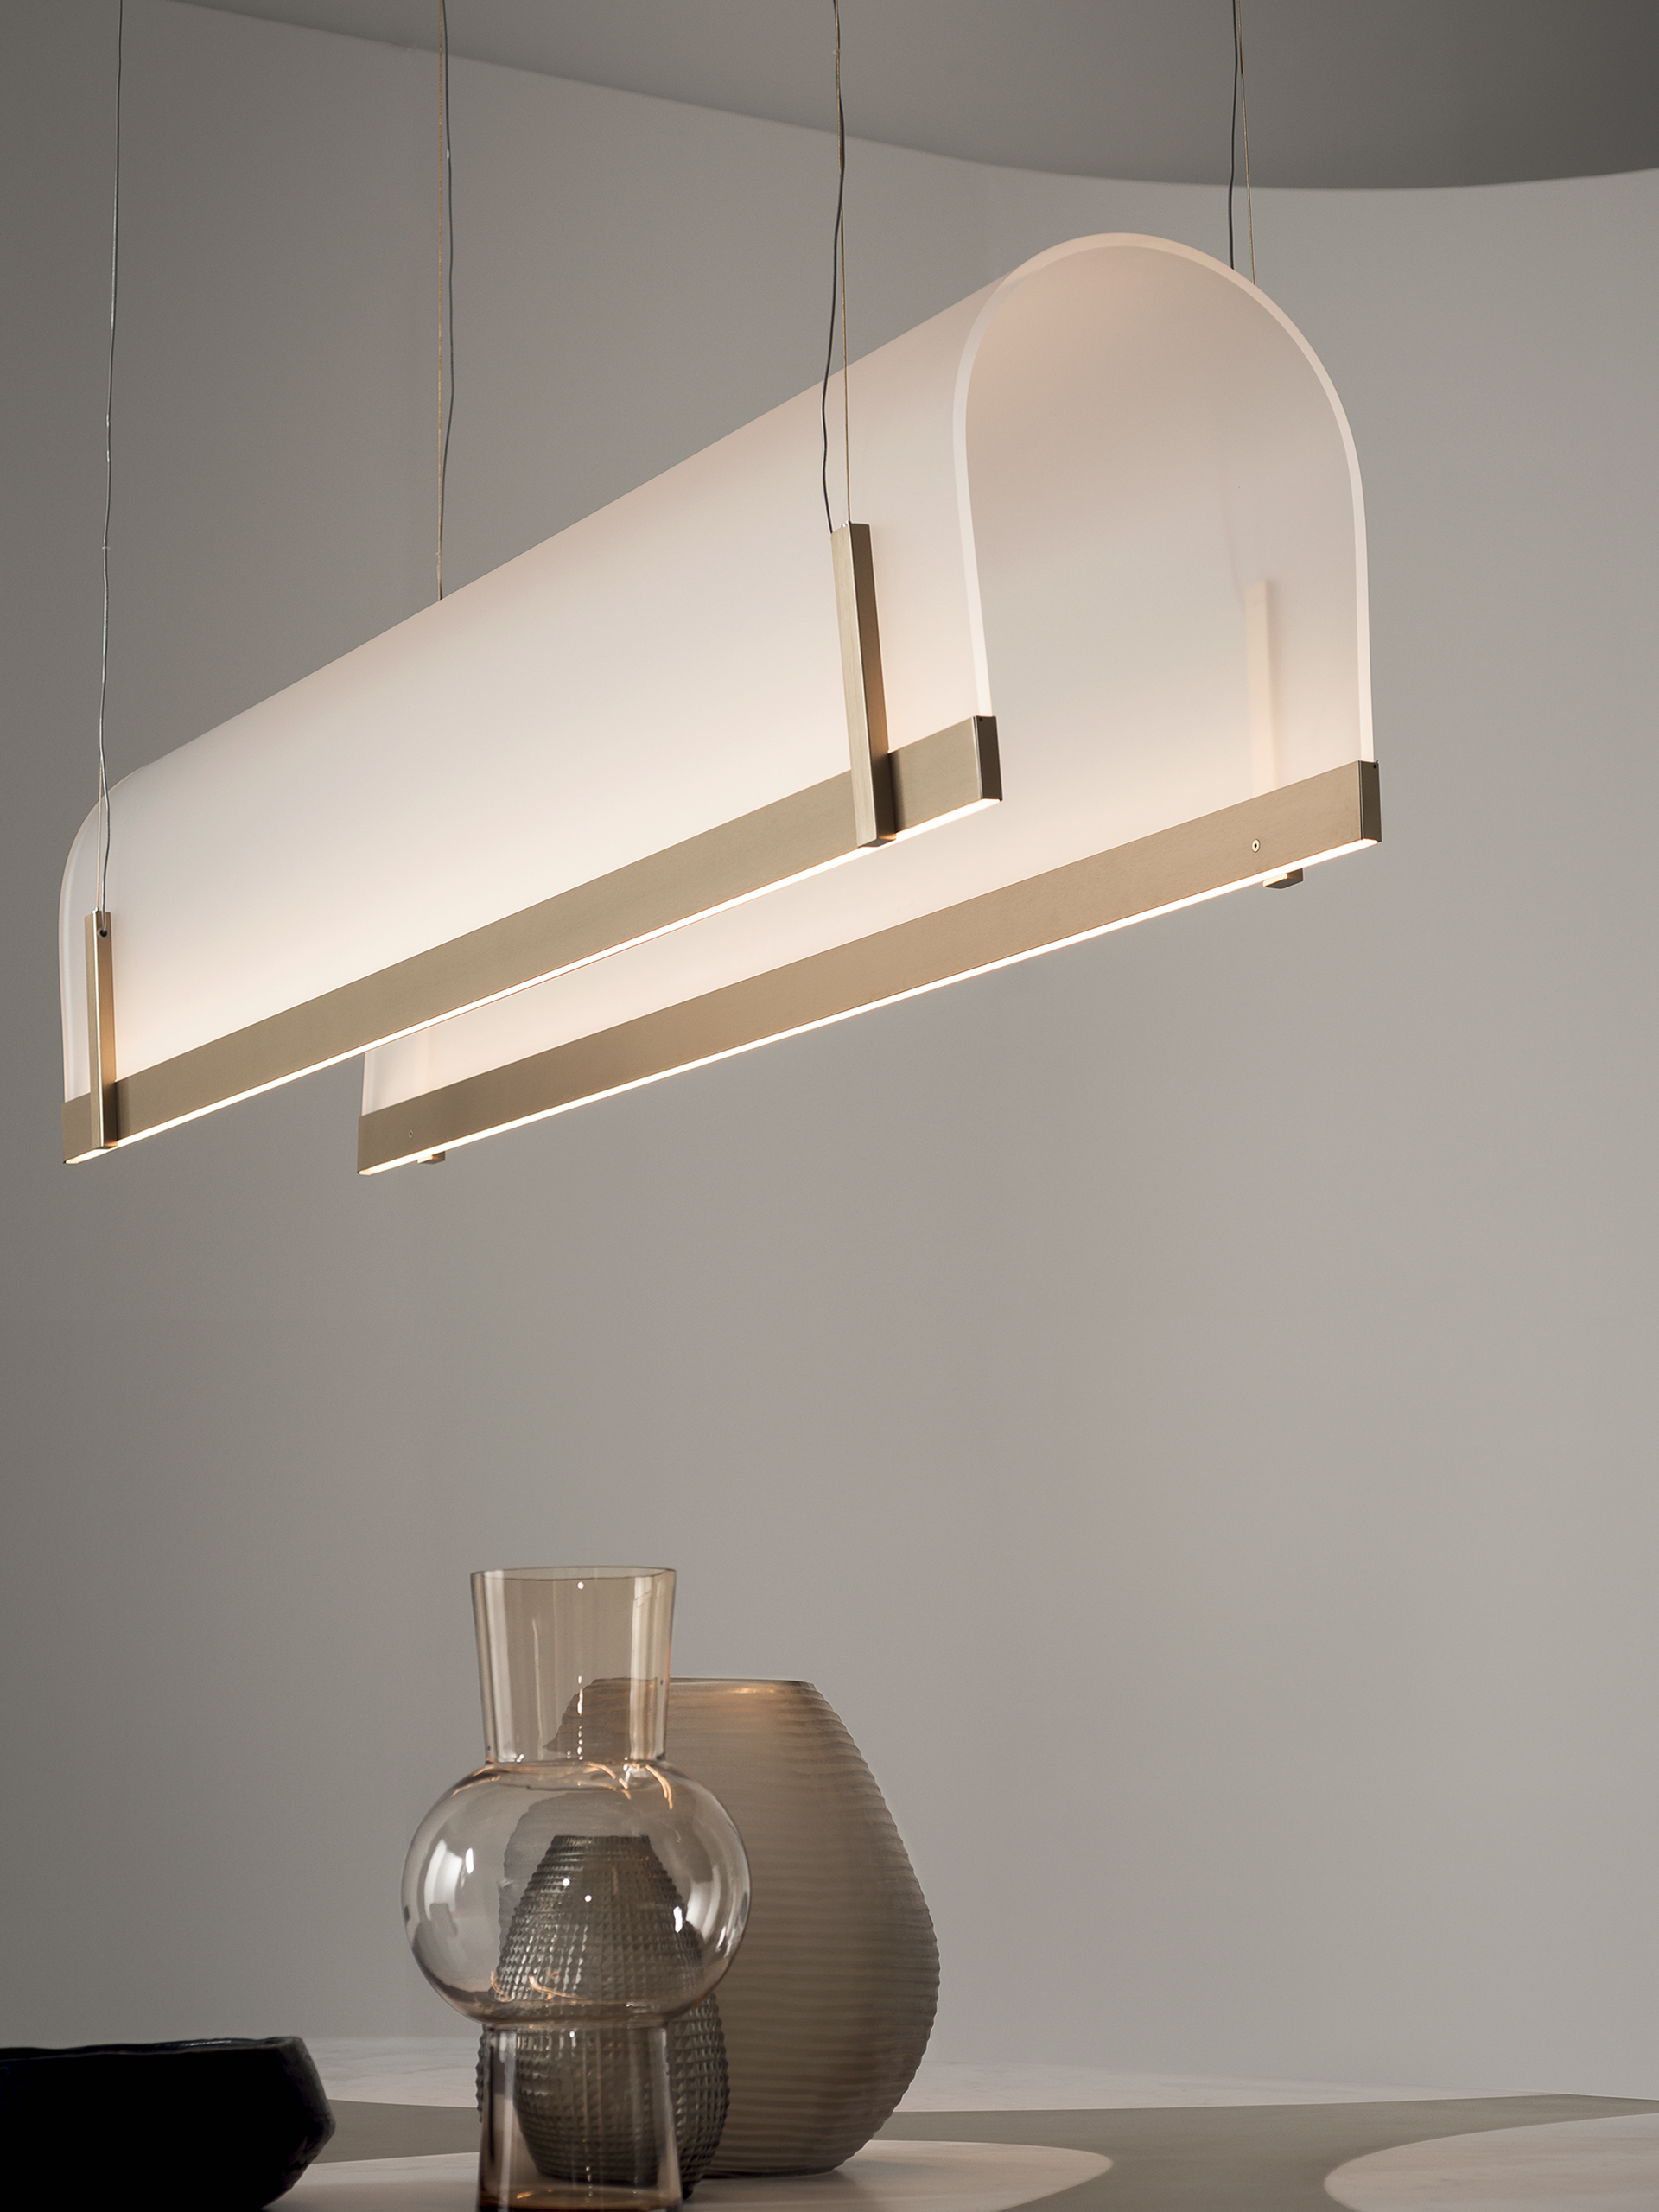 4. Tunnel, wall and suspension lamp in satin brass-plated metal, for Baxter - ph. © Andrea Ferrari